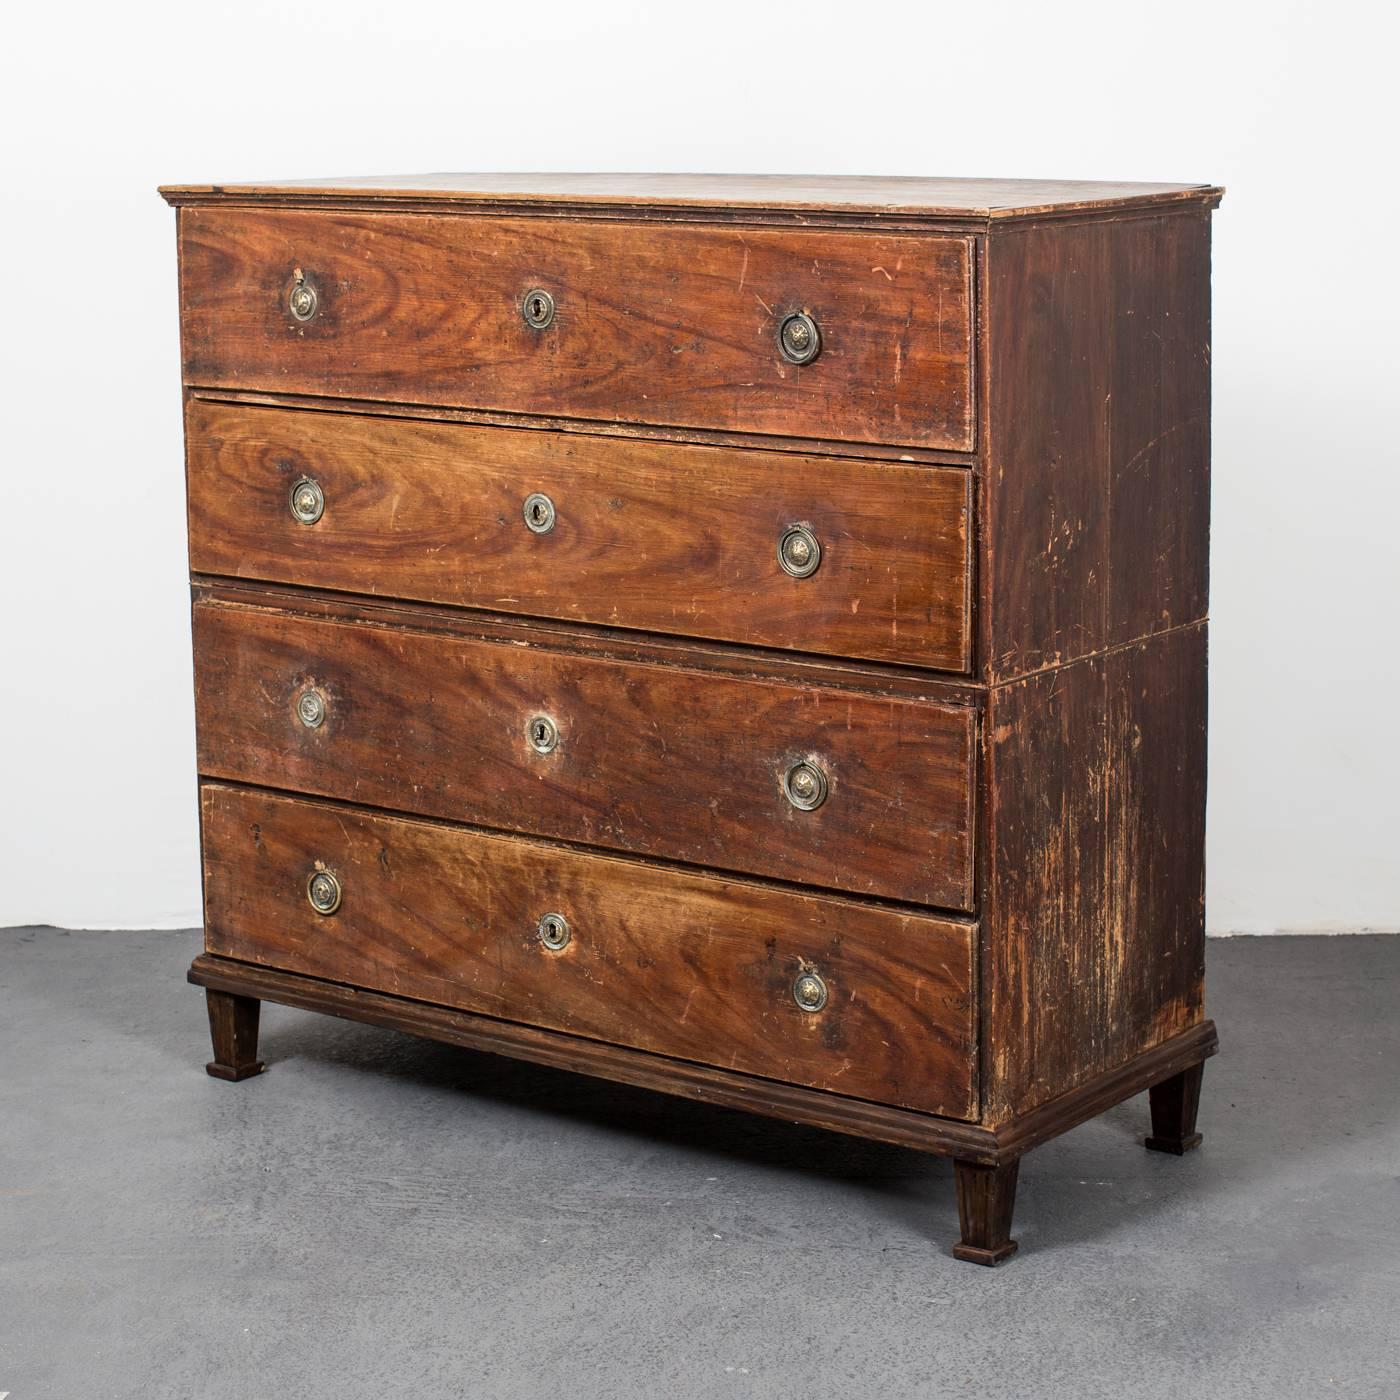 A chest of drawers made during the 18th century and Gustavian in Sweden. Four drawers standing on a frame with four channeled and tapered legs. Original painted finish and brass hardware.
 